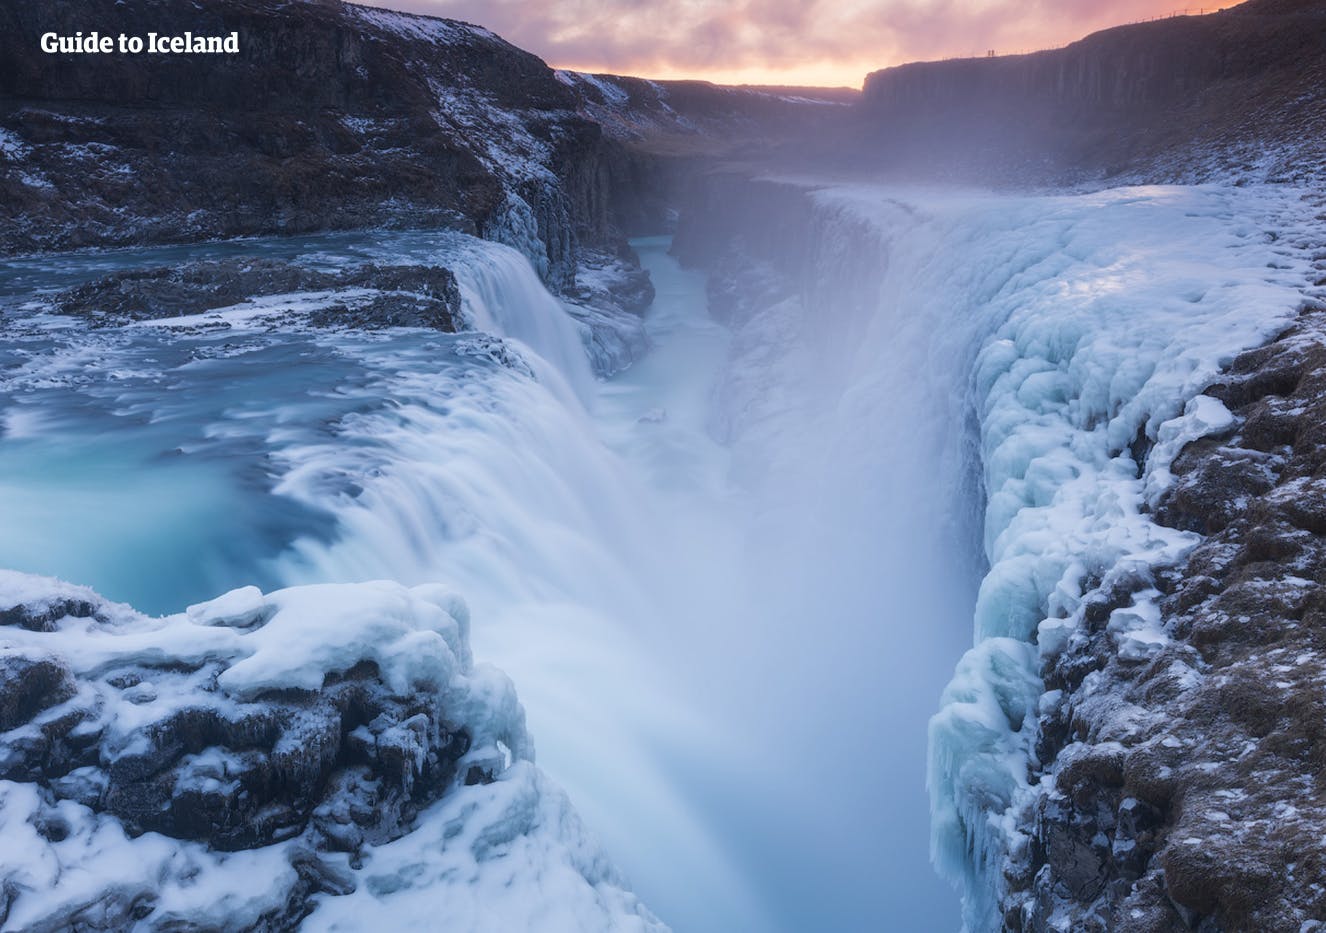 The mighty Gullfoss waterfall is stunning, and the surrounding frozen landscapes in the wintertime only add to its allure